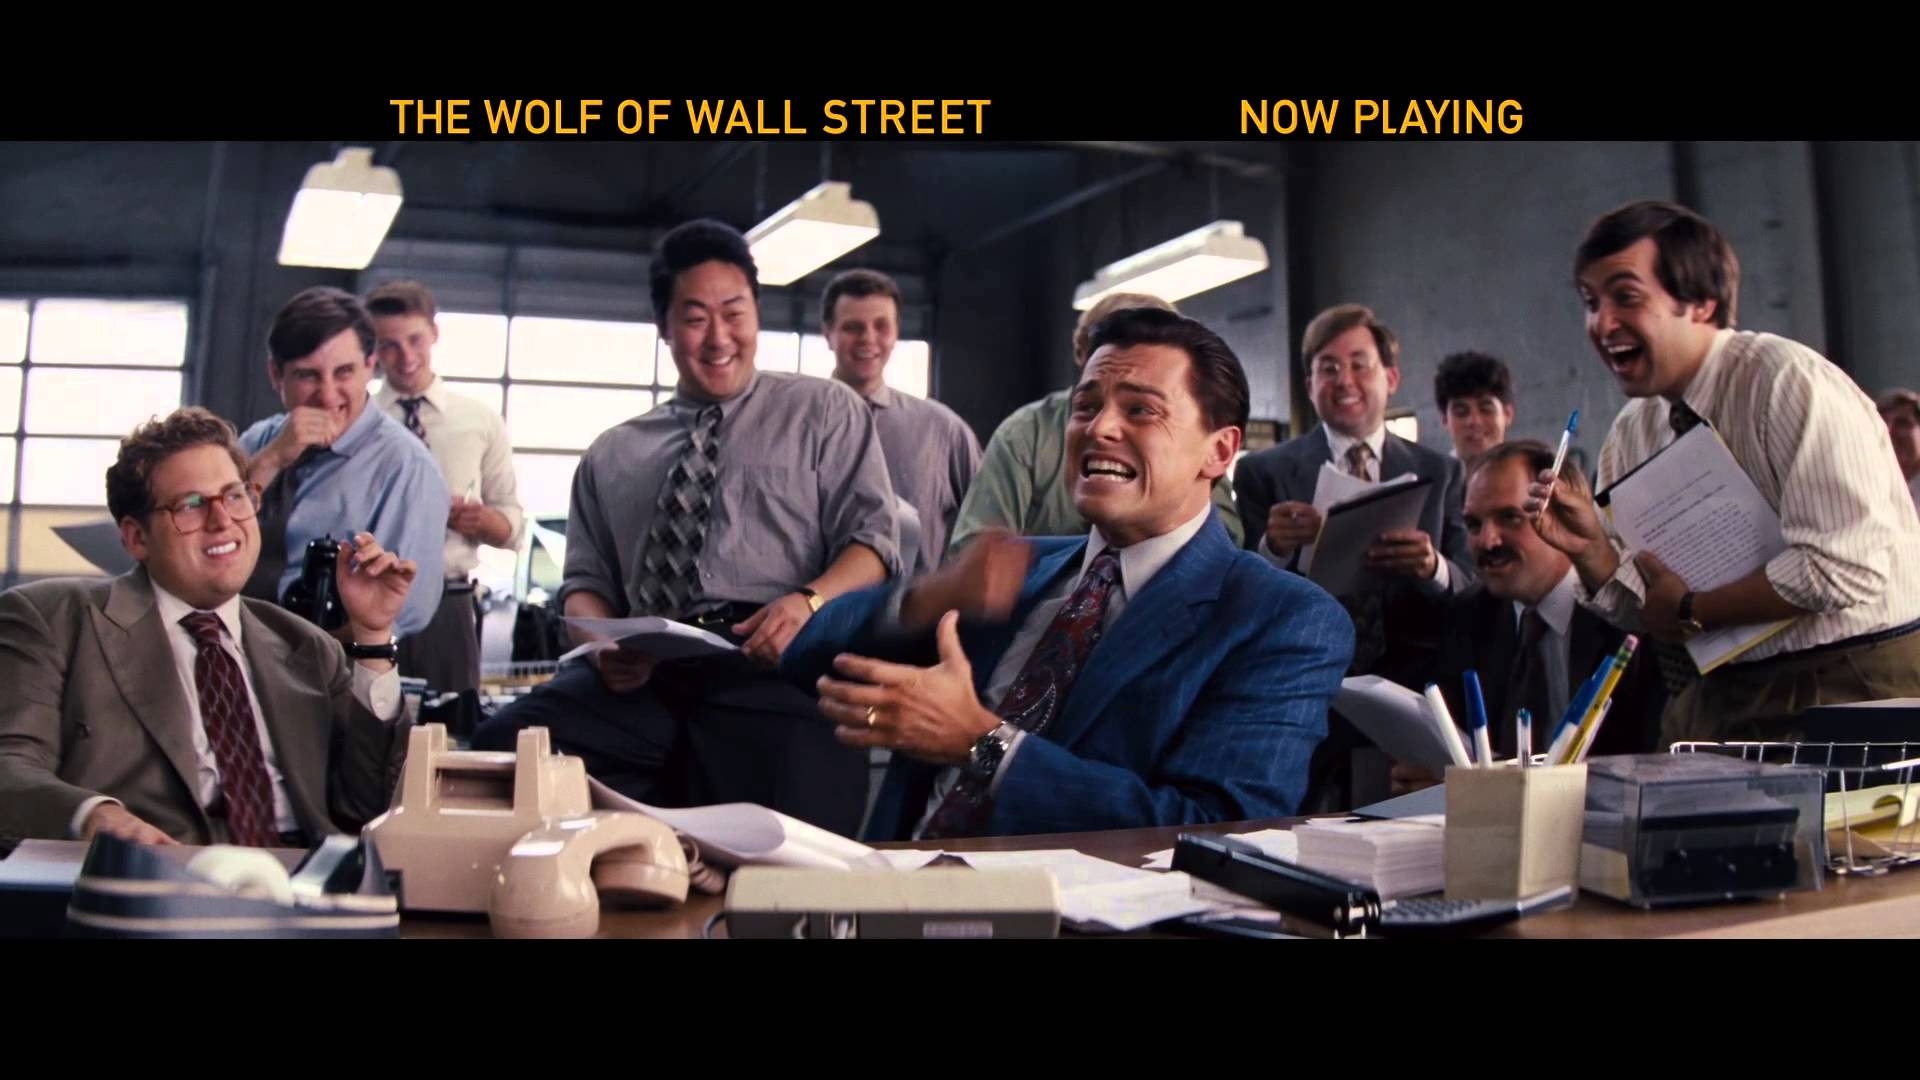 10 New The Wolf Of Wall Street Wallpaper FULL HD 1080p For PC